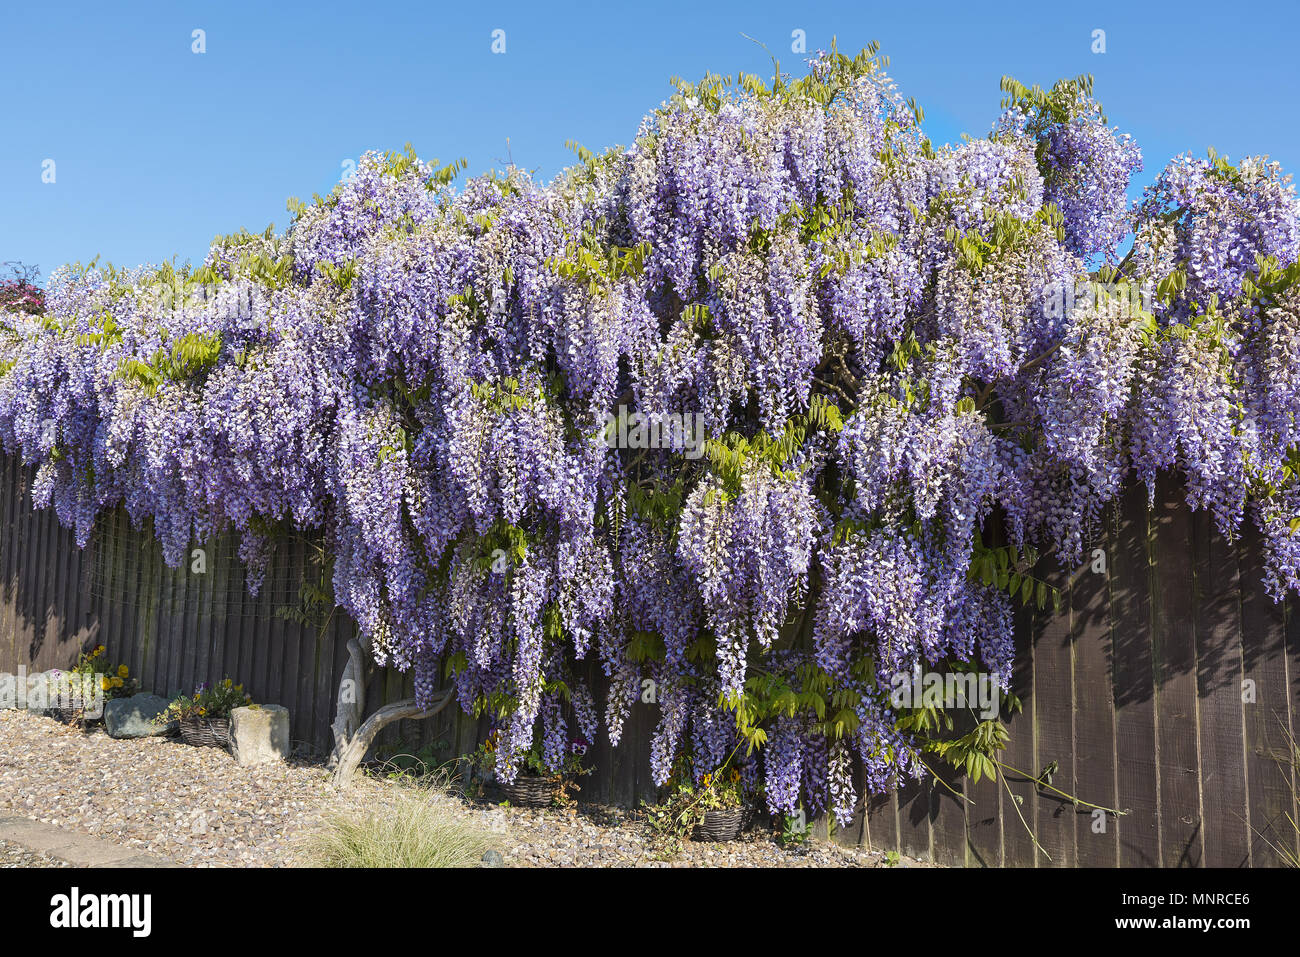 Wisteria shrub in full flower in springtime covering and hiding a garden fence. Stock Photo